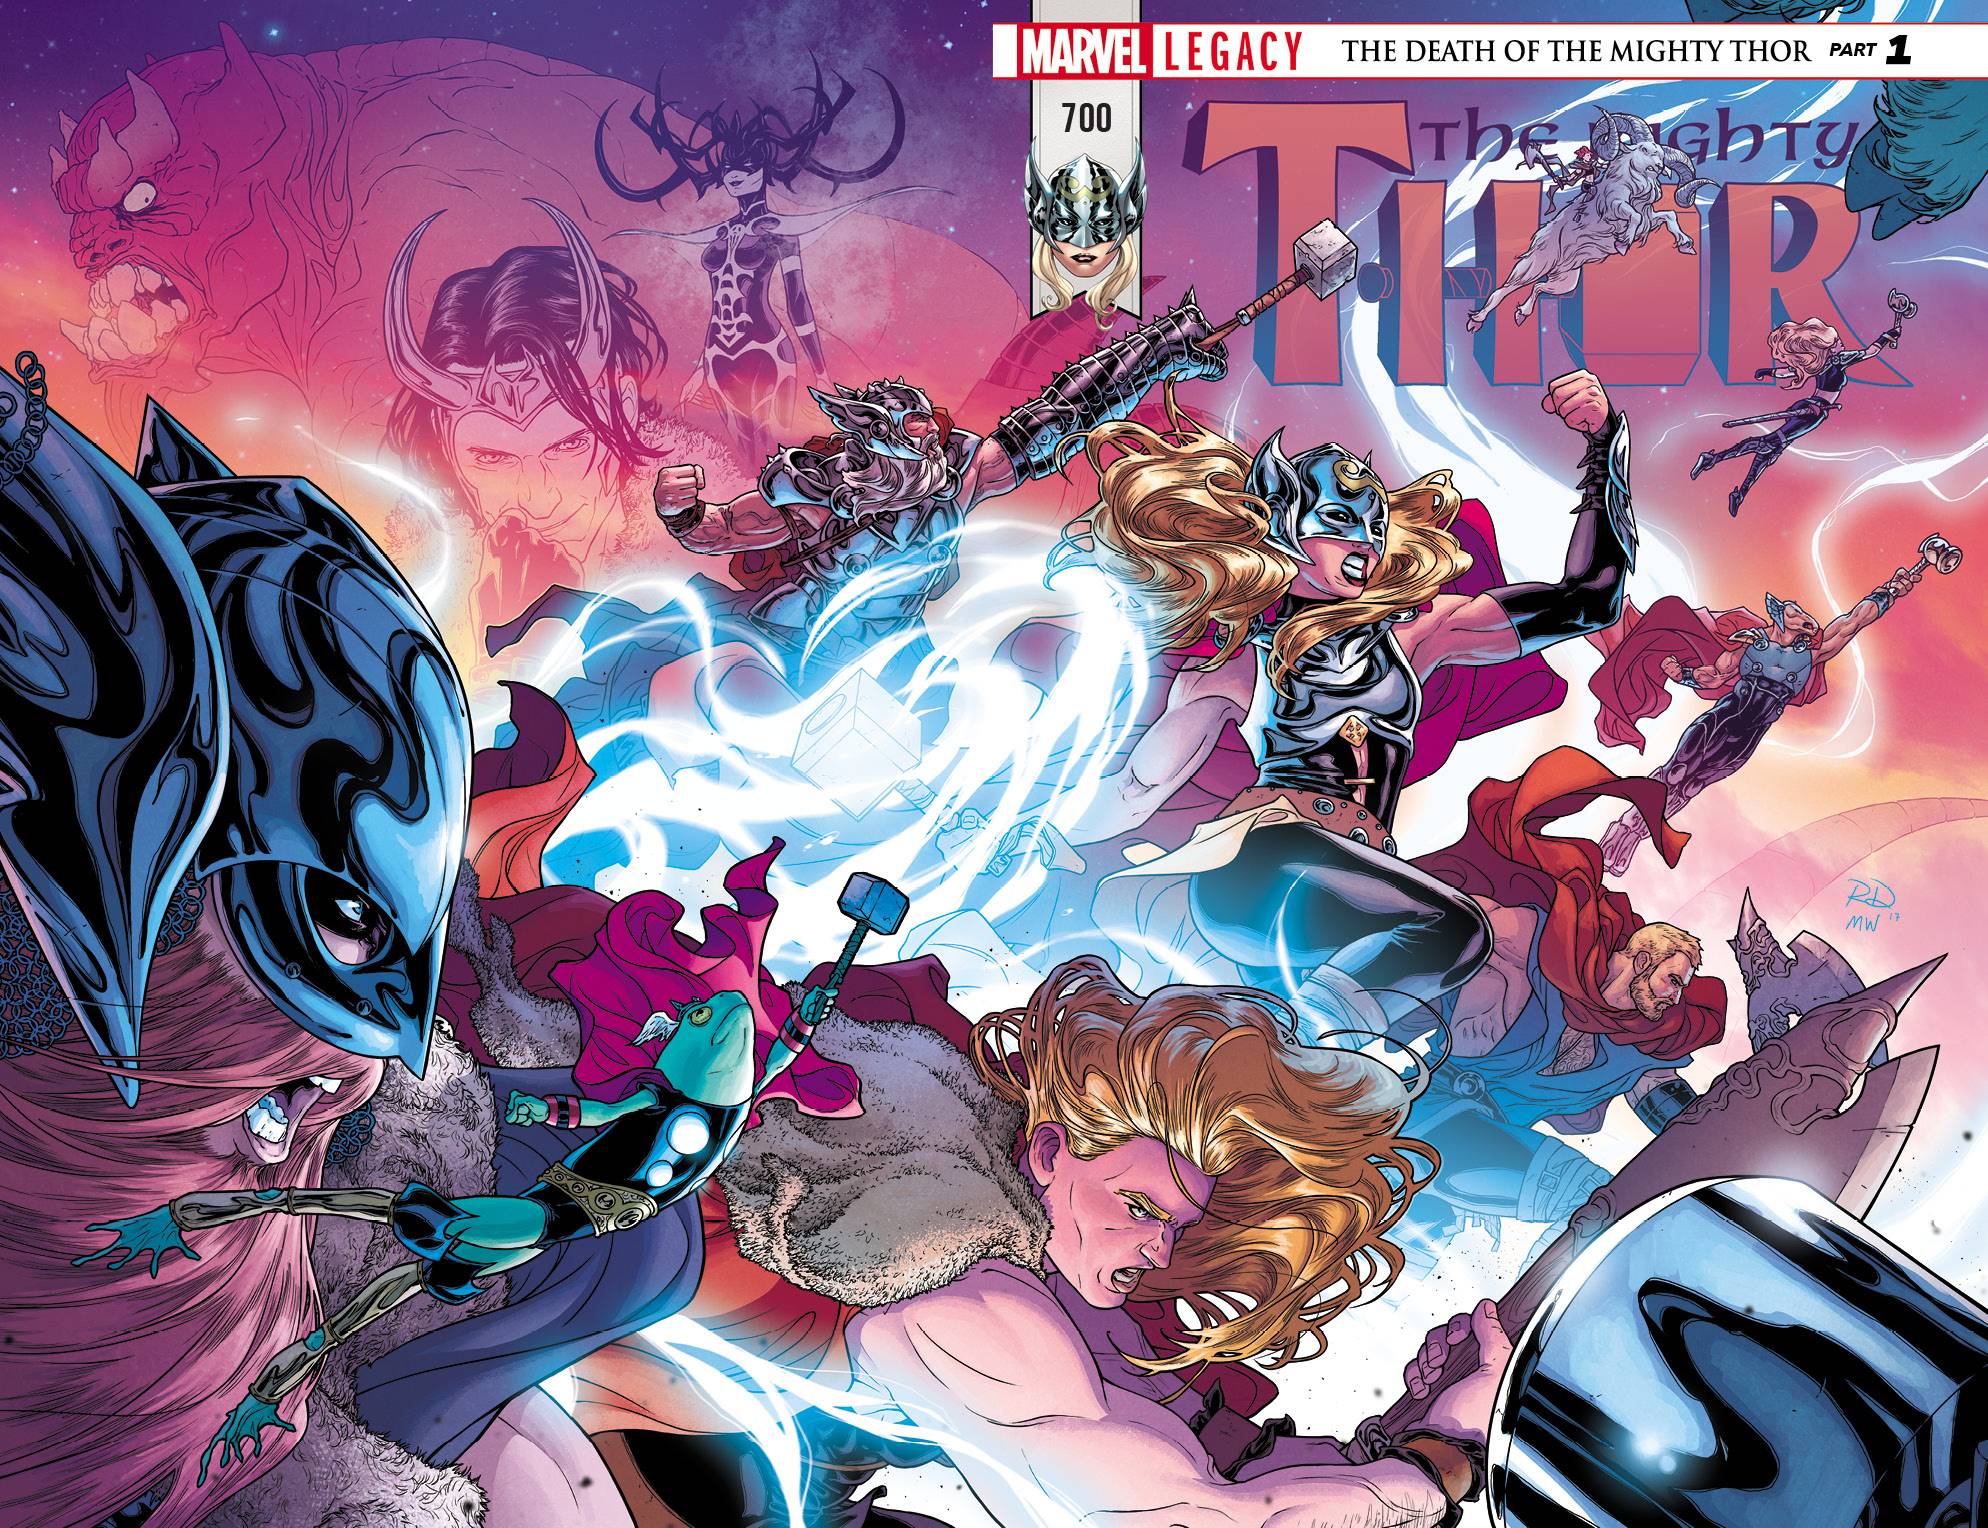 MIGHTY THOR #700